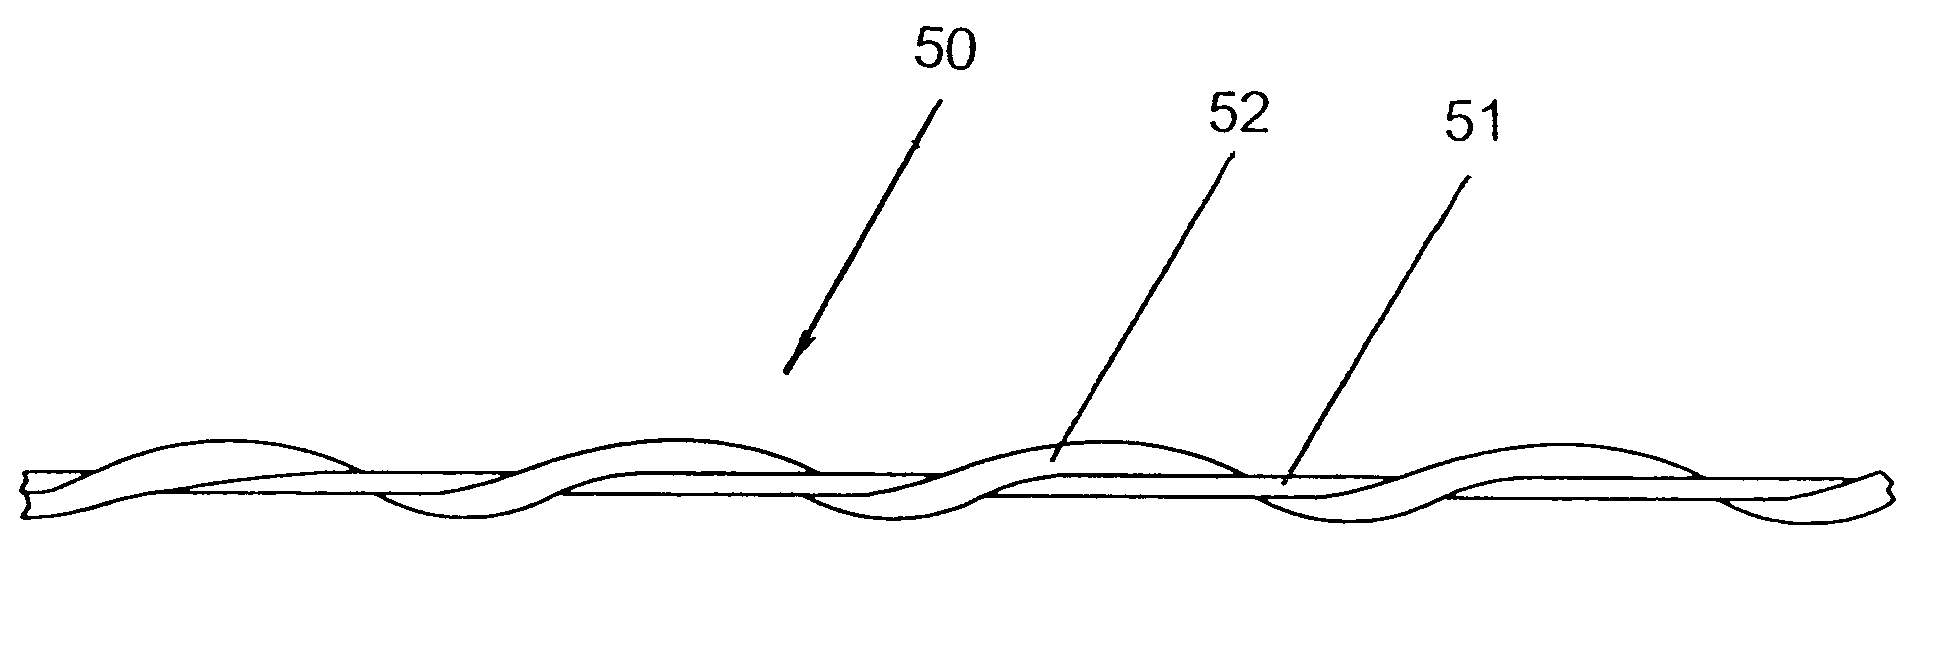 Hybrid cables, a process for obtaining such and composite fabrics incorporating such